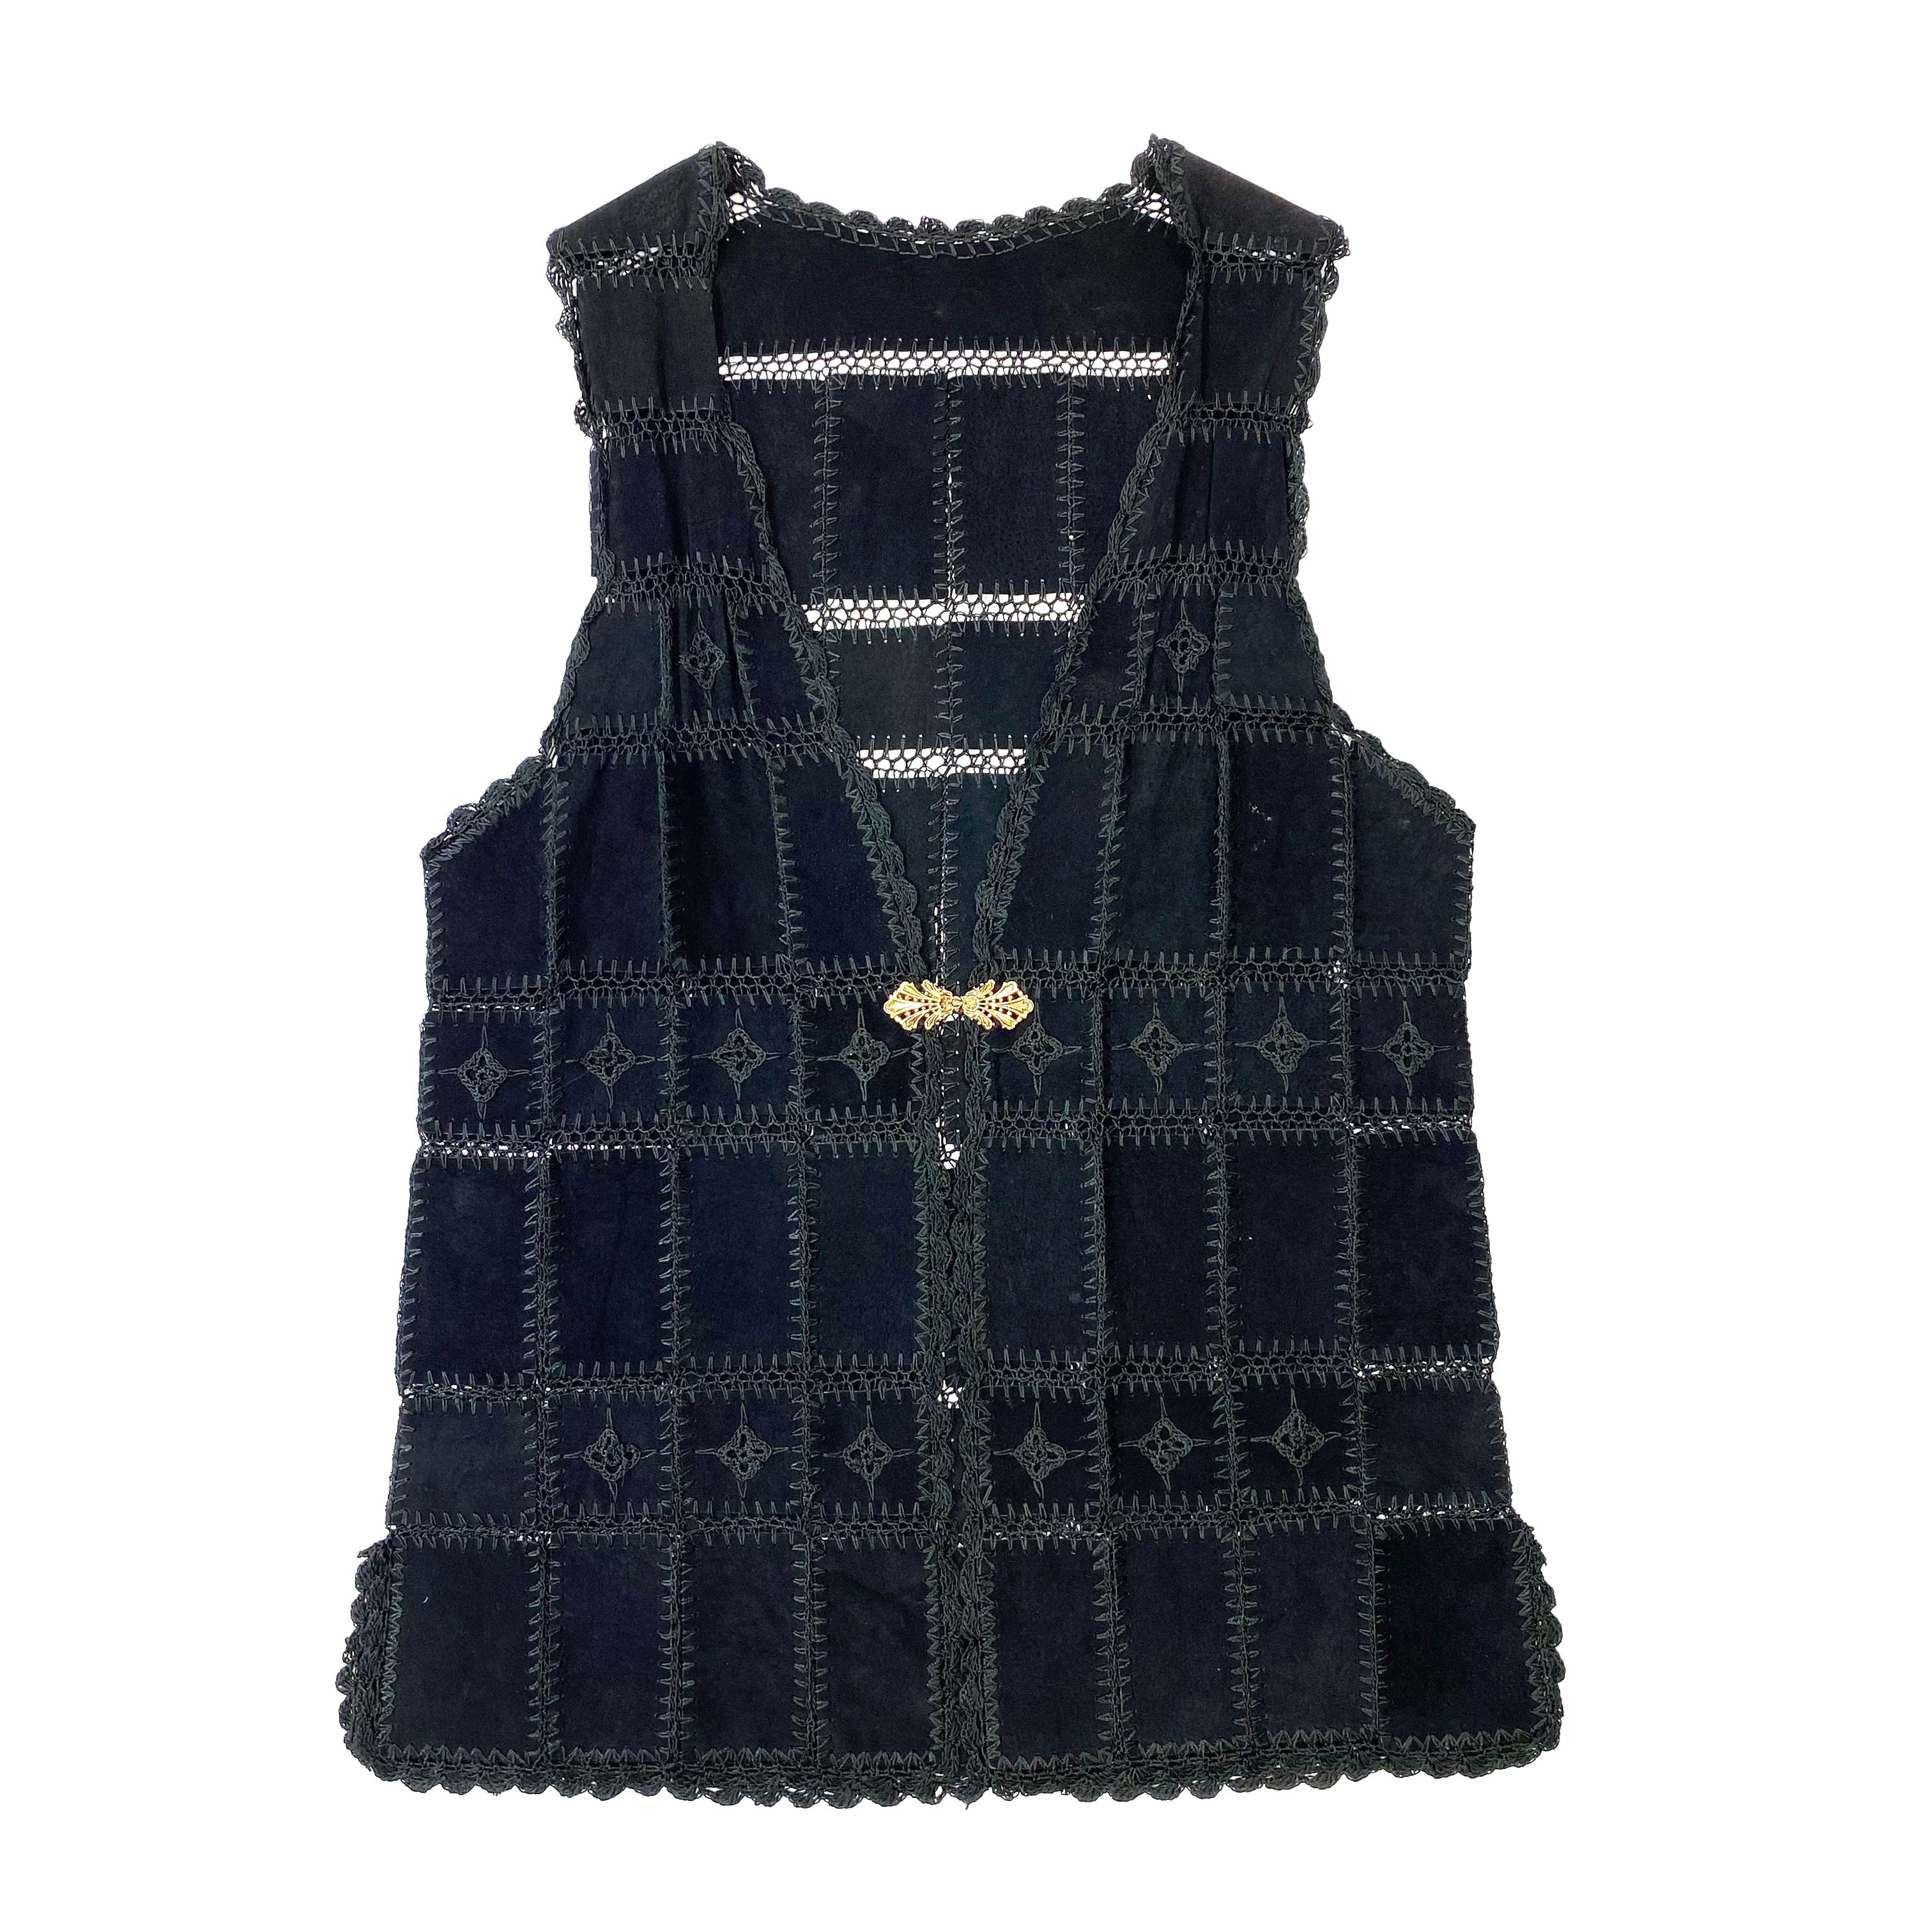 Leather Patchwork Crochet Detailled Tunic/Dress